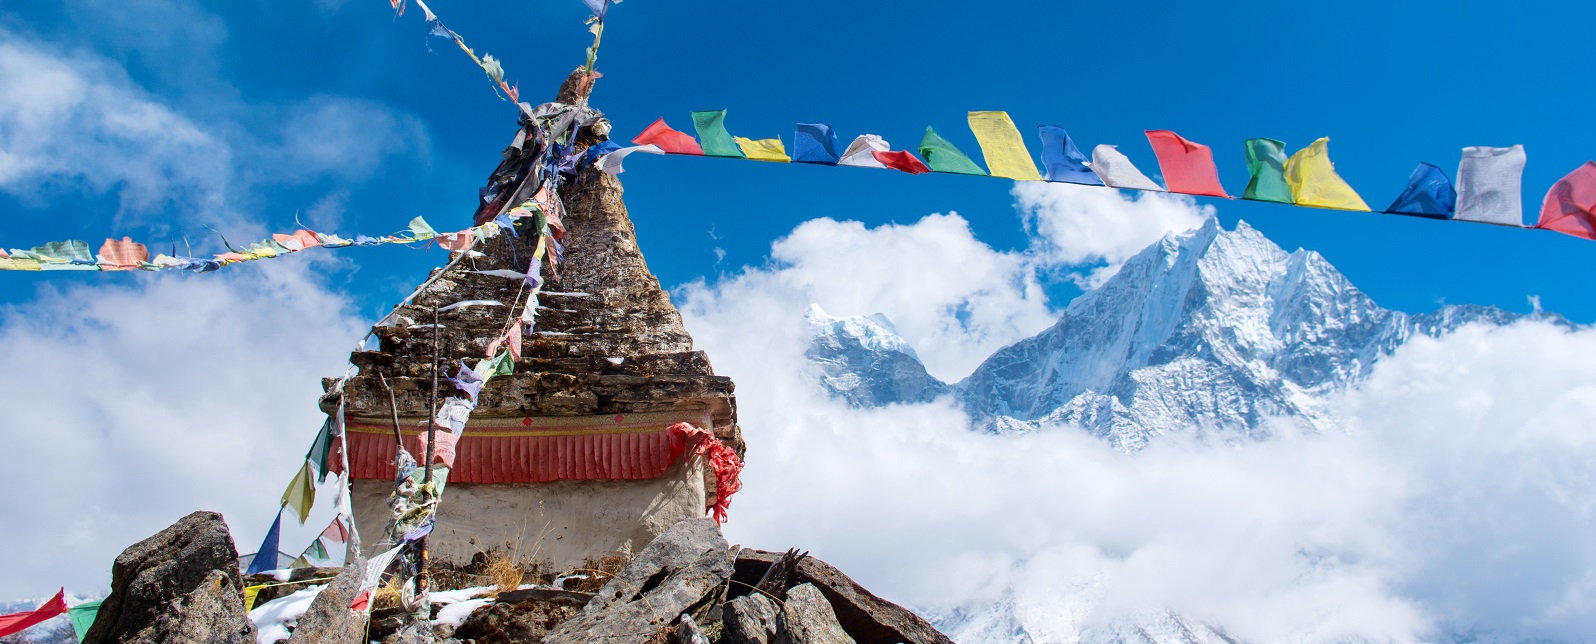 Songs of the Mountains - On Your Nepal Tour | Enchanting Travels